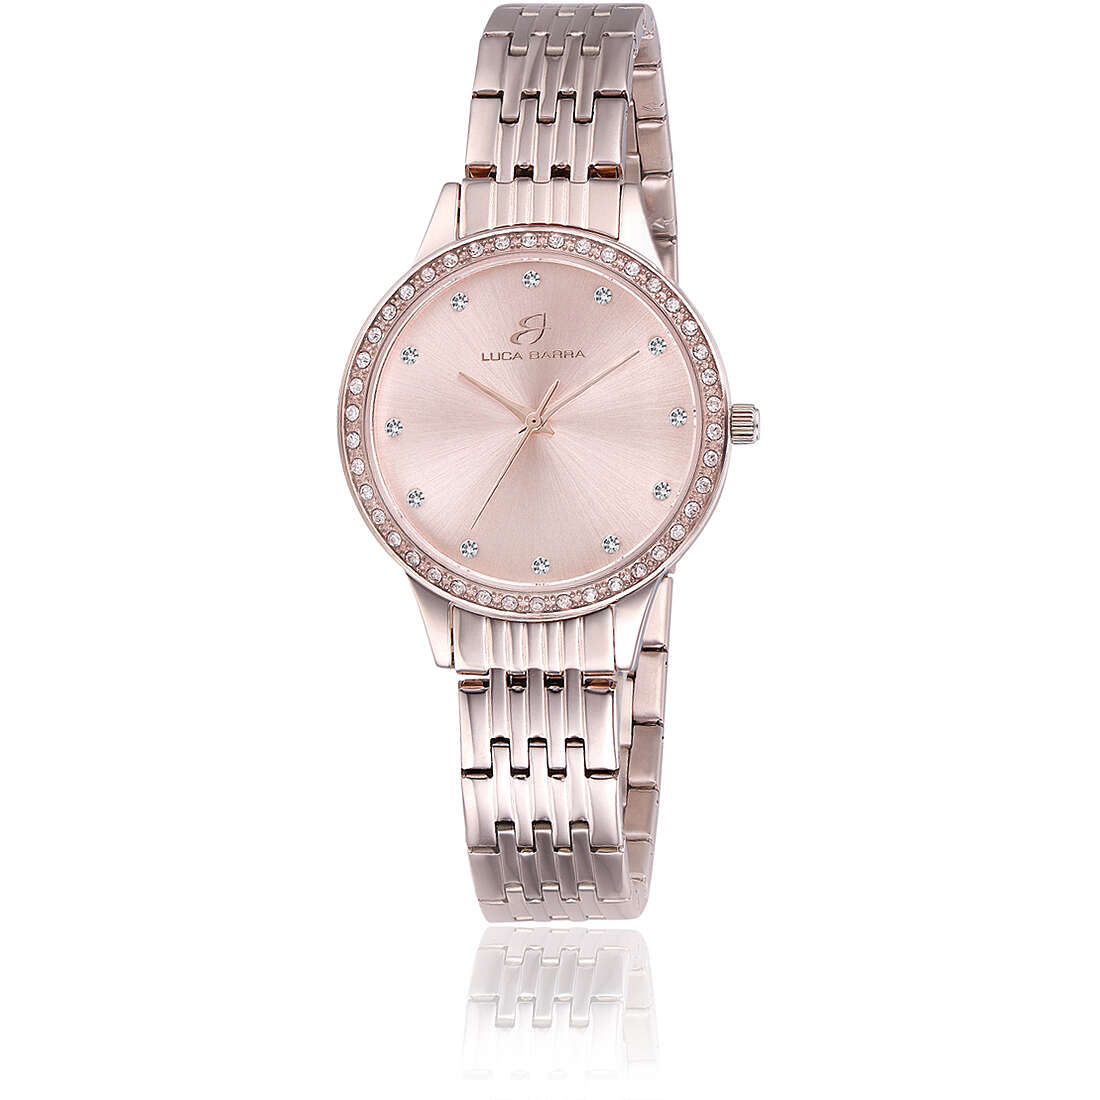 only time watch Steel Pink dial woman BW278